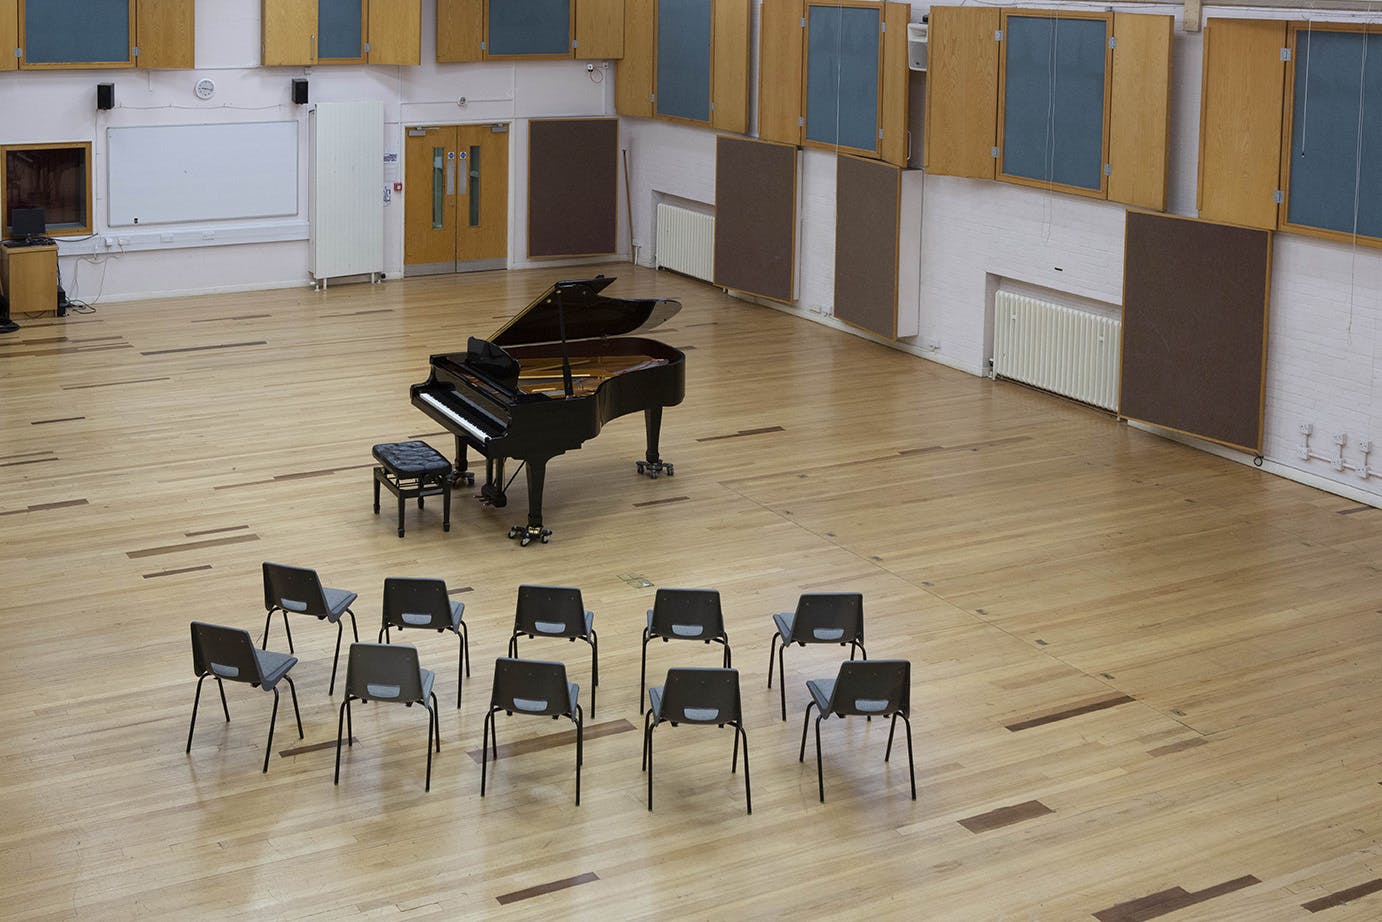 View of the music recital room